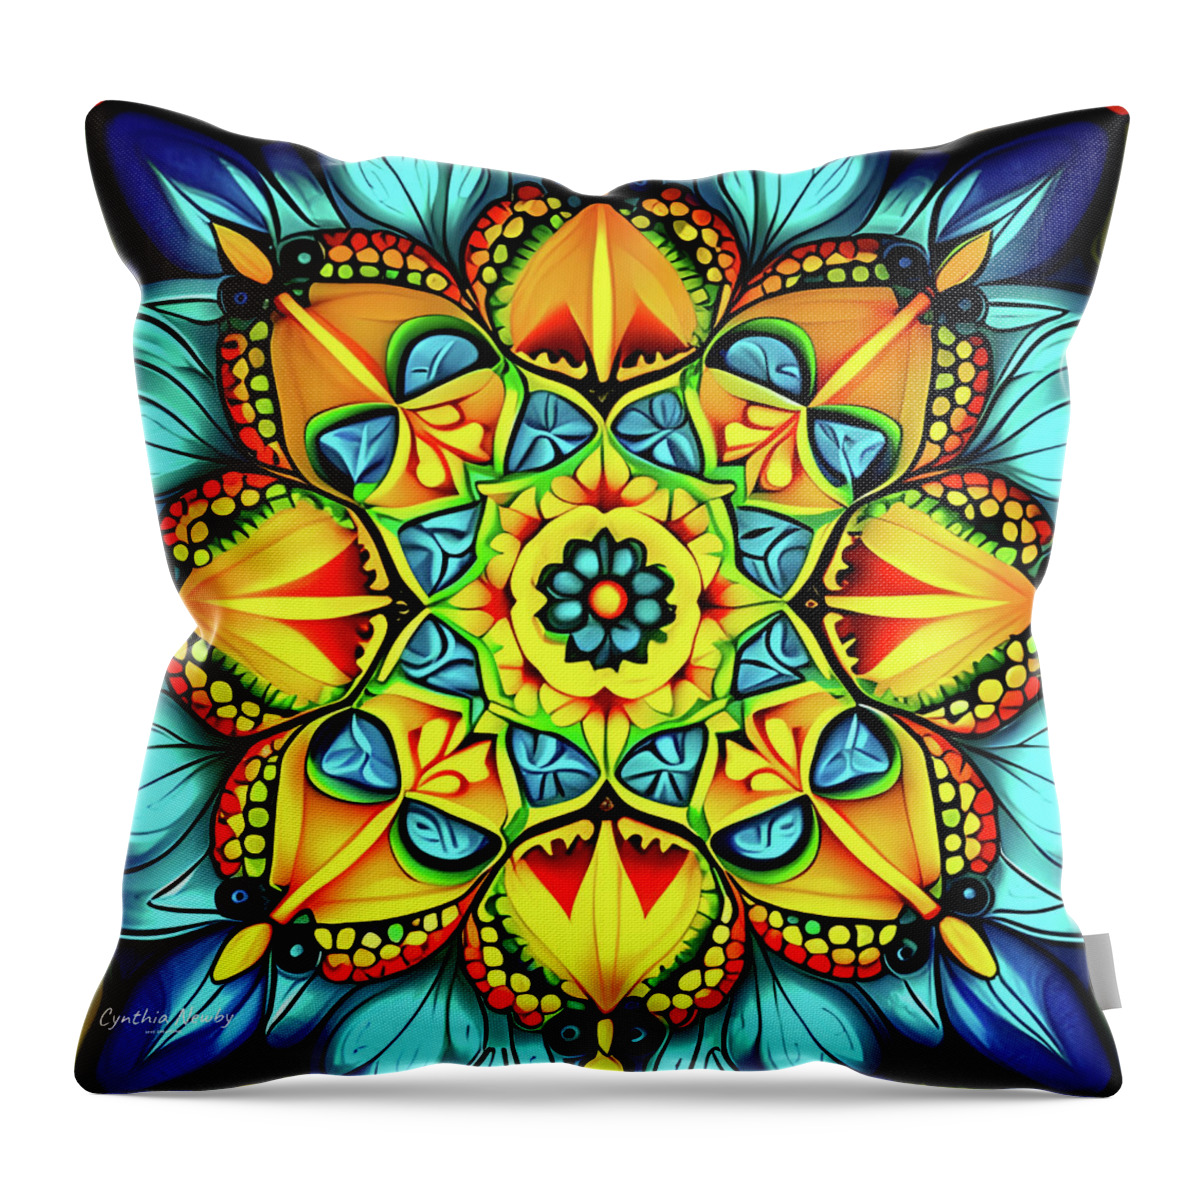 Newby Throw Pillow featuring the digital art Yellow Themed Kaleidoscope by Cindy's Creative Corner